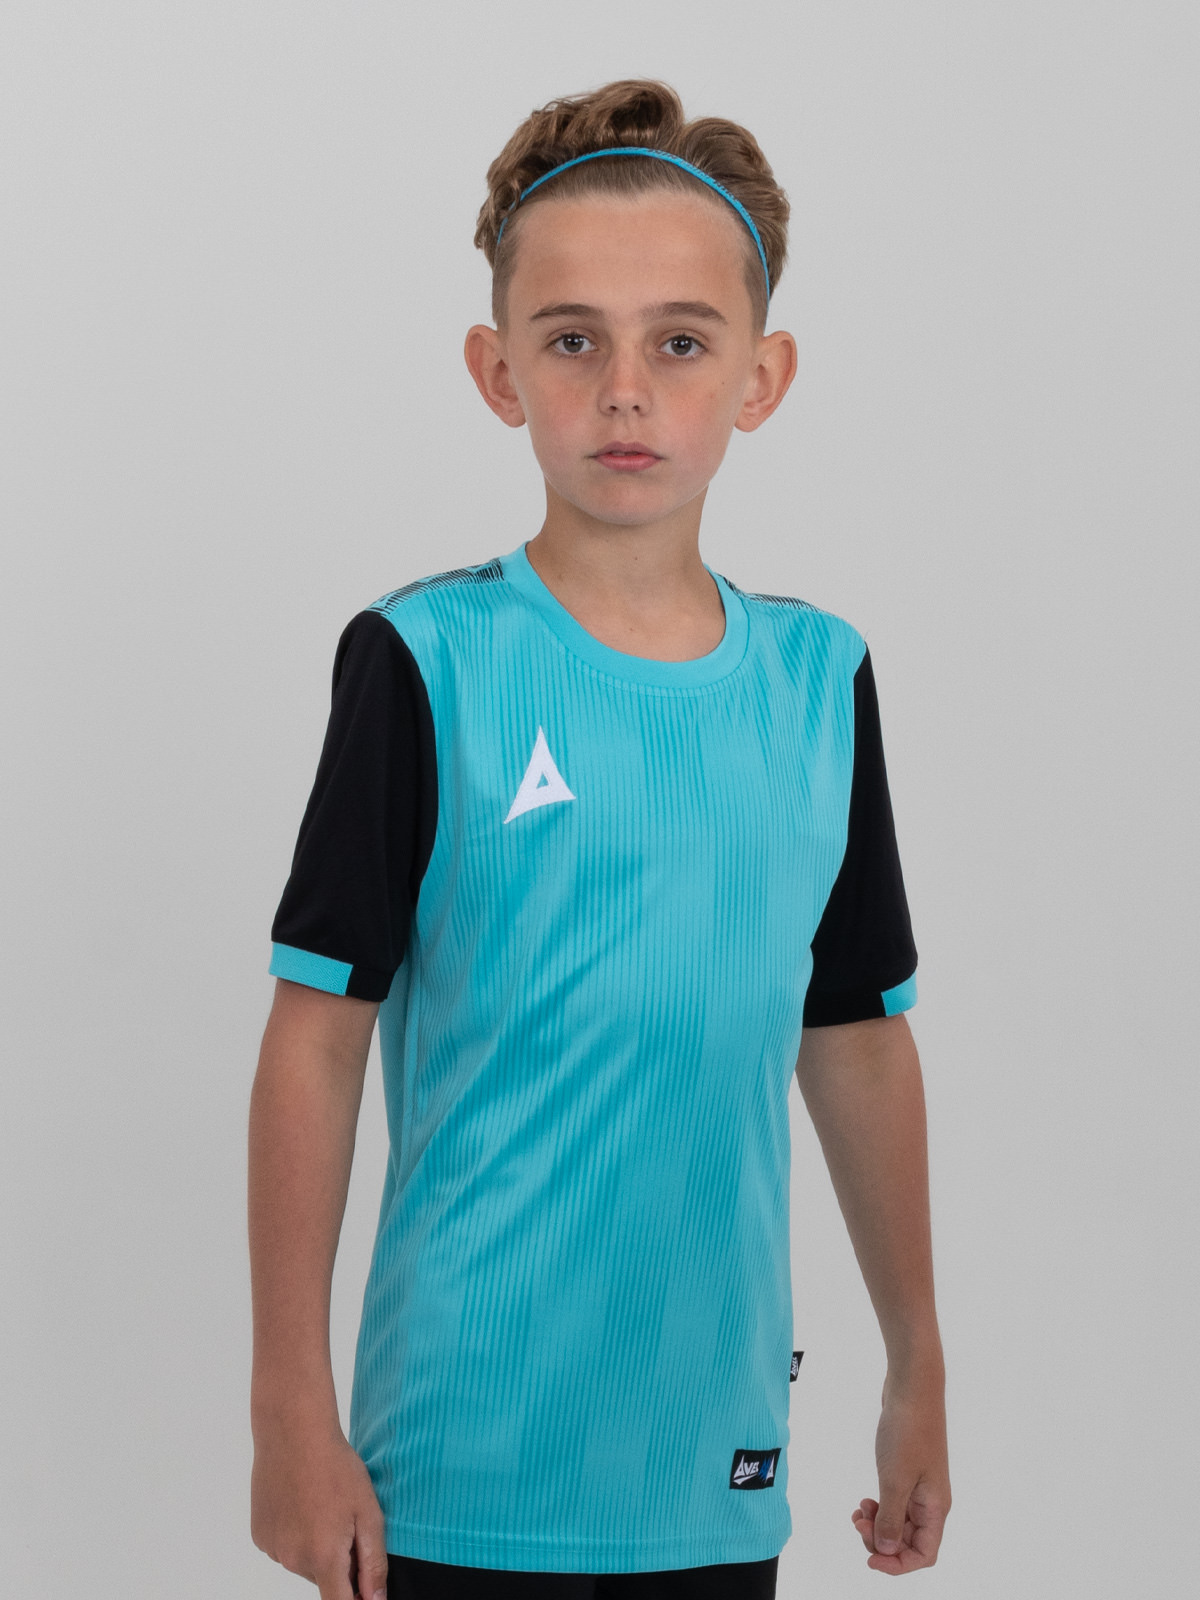 a young child wearing a junior light blue football shirt with black sleeves